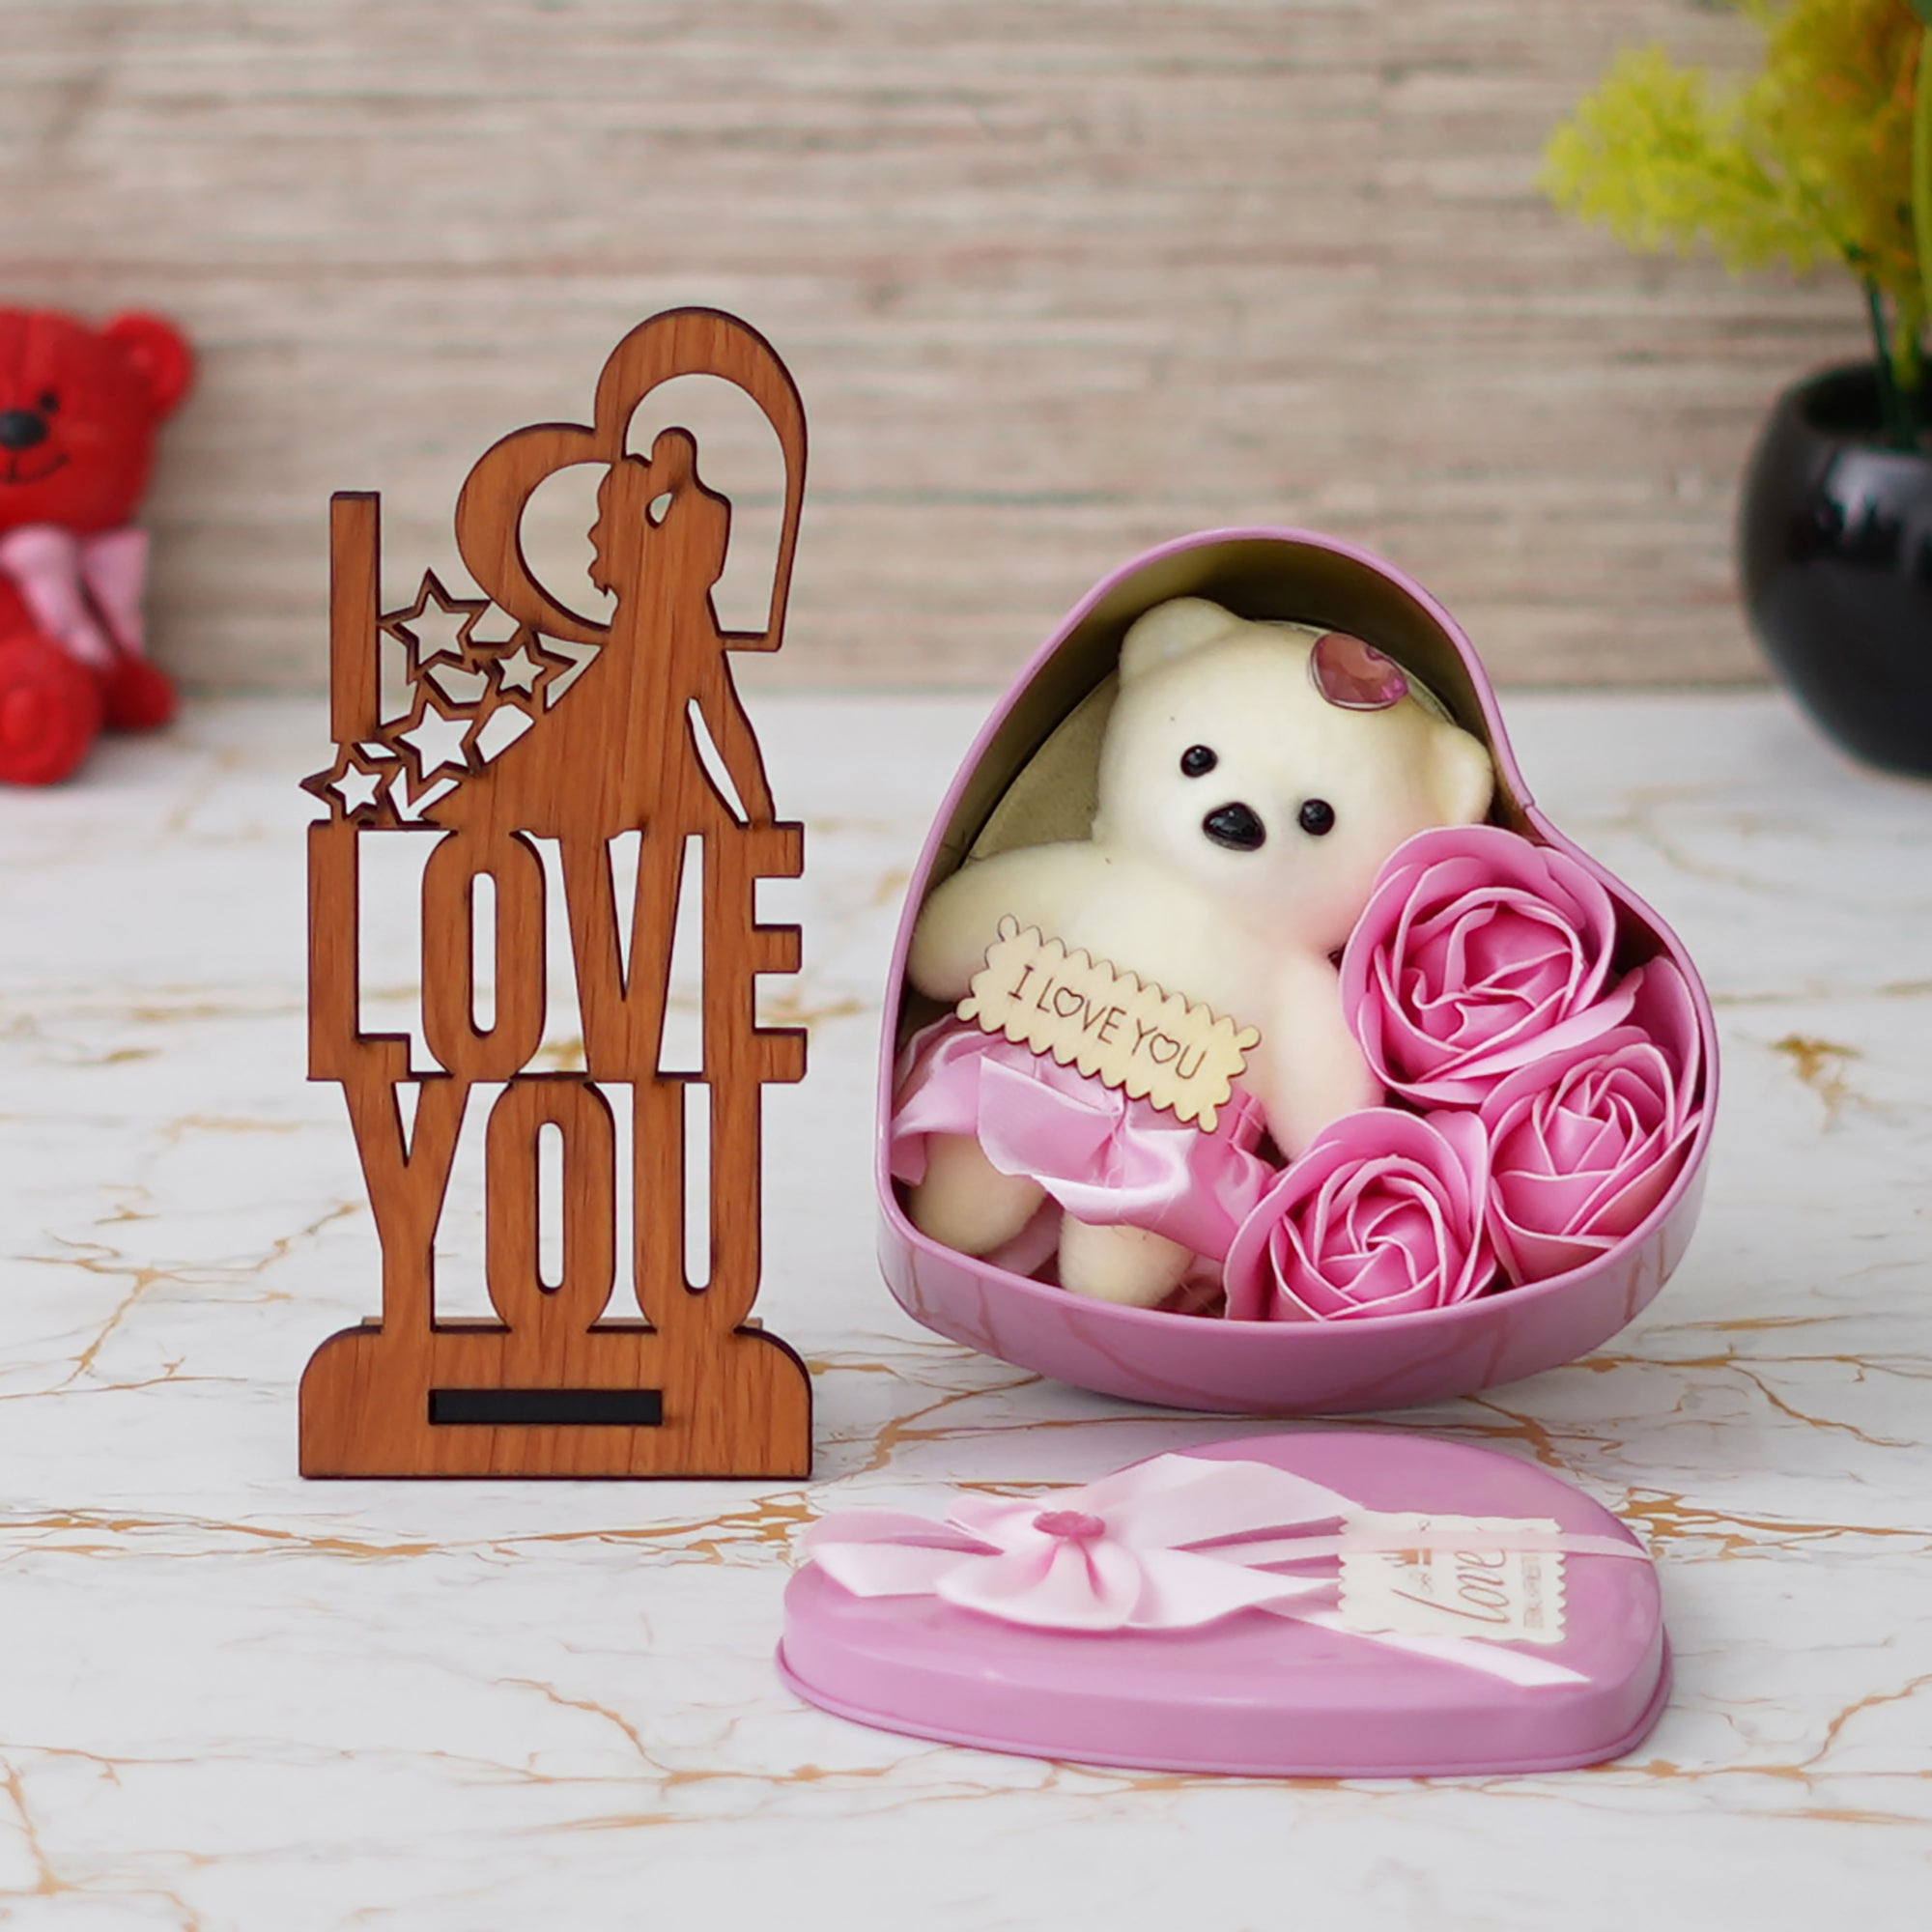 Valentine Combo of "Love You" Wooden Showpiece With Stand, Pink Heart Shaped Gift Box with Teddy and Roses